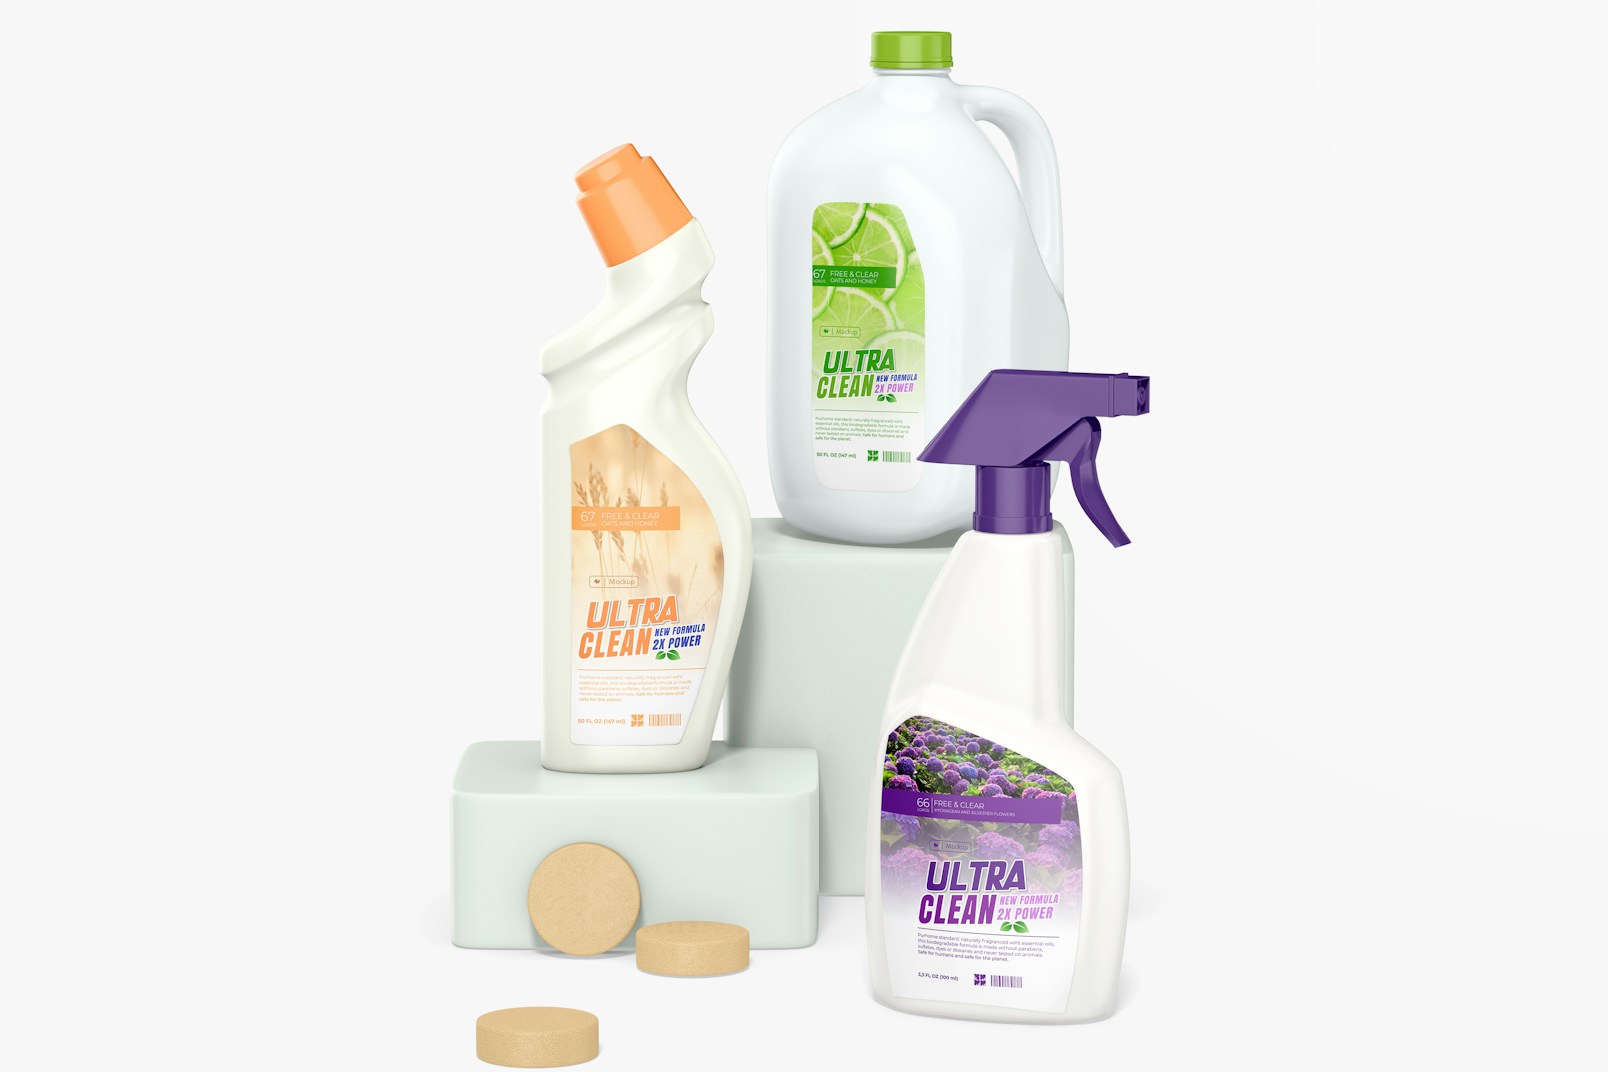 Cleaning Products Scene Mockup, on Podiums